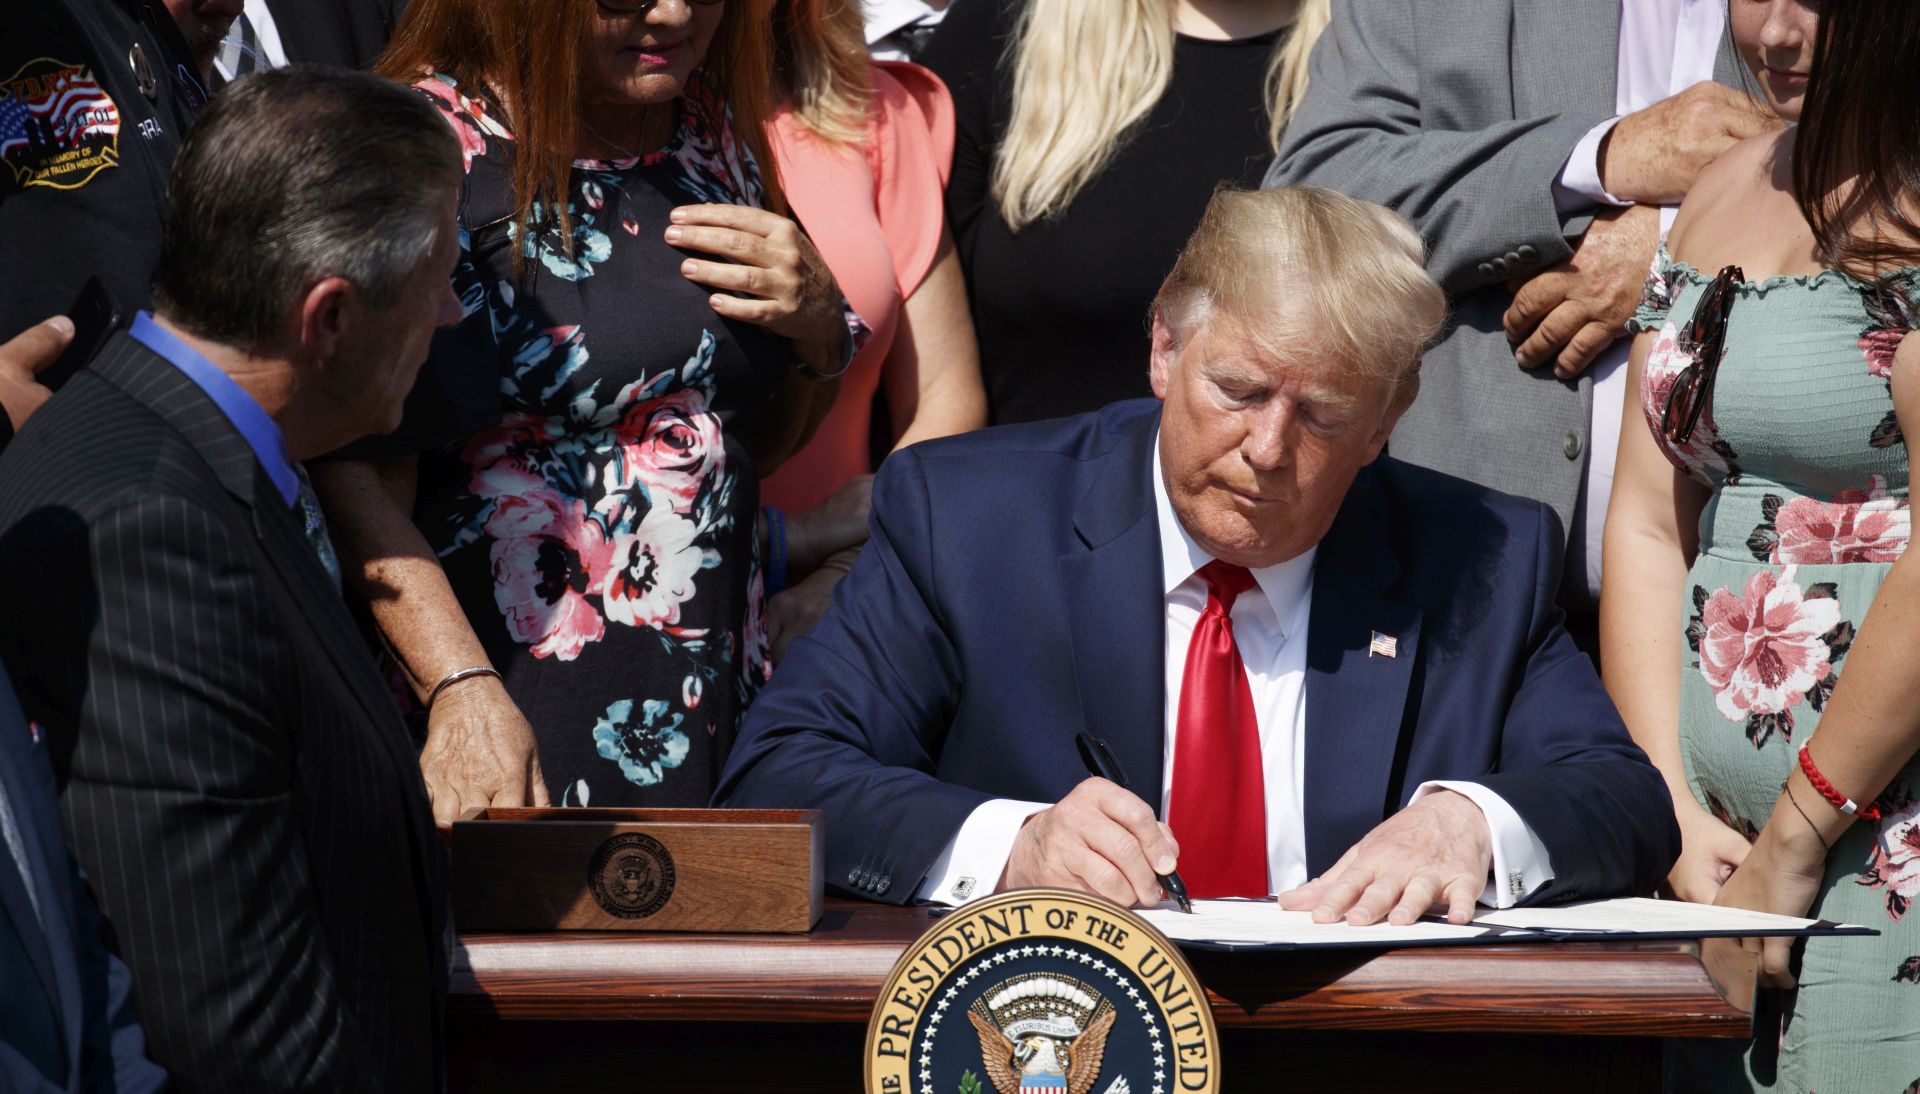 epa07747590 US President Donald J. Trump, with 9/11 first responders and family members, signs in a signing ceremony for H.R. 1327, an act to permanently authorize the September 11th victim compensation fund in the Rose Garden of the White House in Washington, DC, USA, 29 July 2019. The fund provides billion of dollars in health care compensation for police officers, firefighters and other first responders to the terrorist attacks of Sept. 11, 2001.  EPA/SHAWN THEW